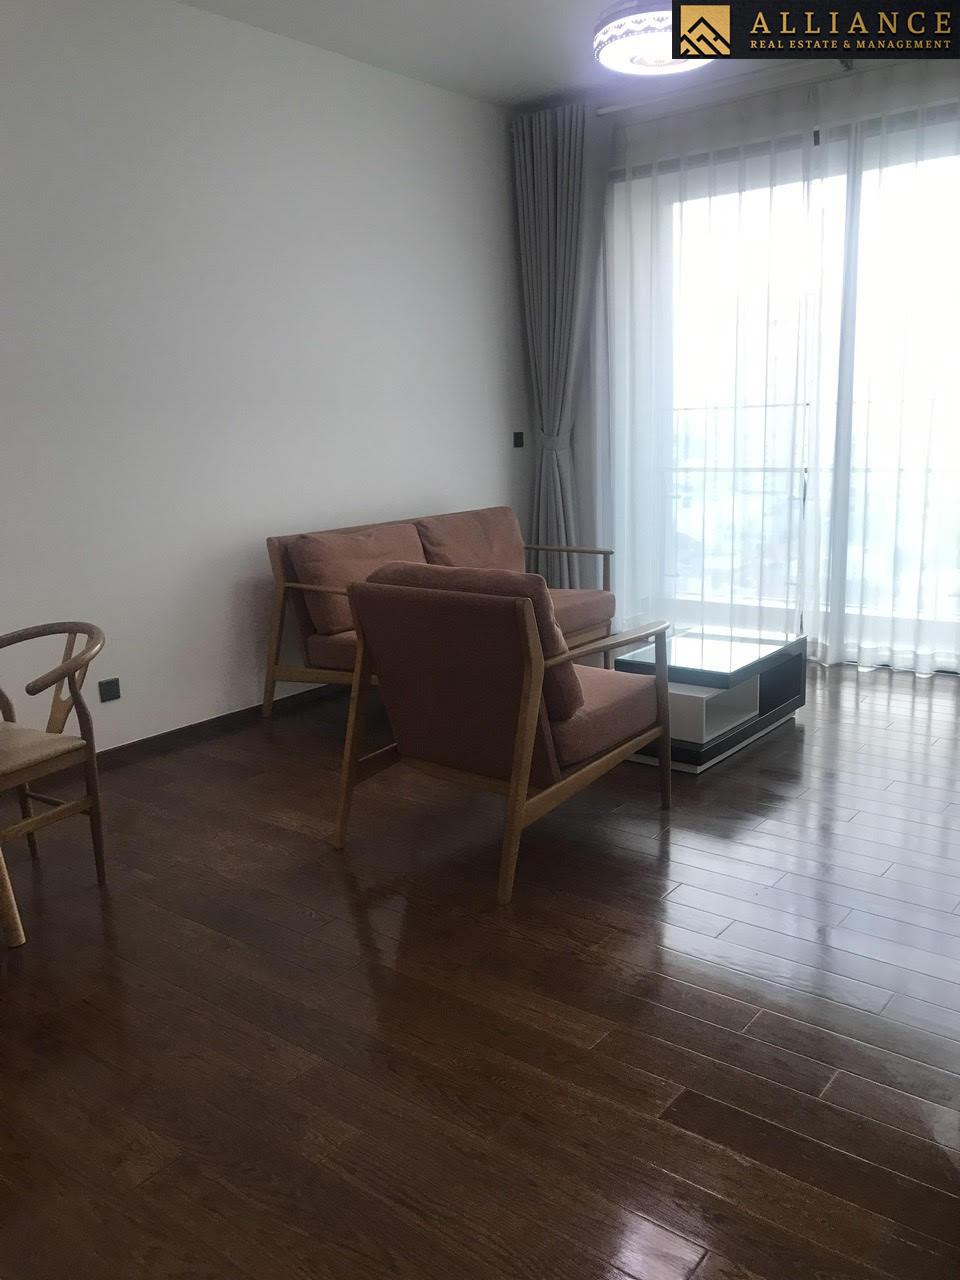 1 Bedroom Apartment (Dedge) for sale in Thao Dien Ward, Thu Duc City, HCM City